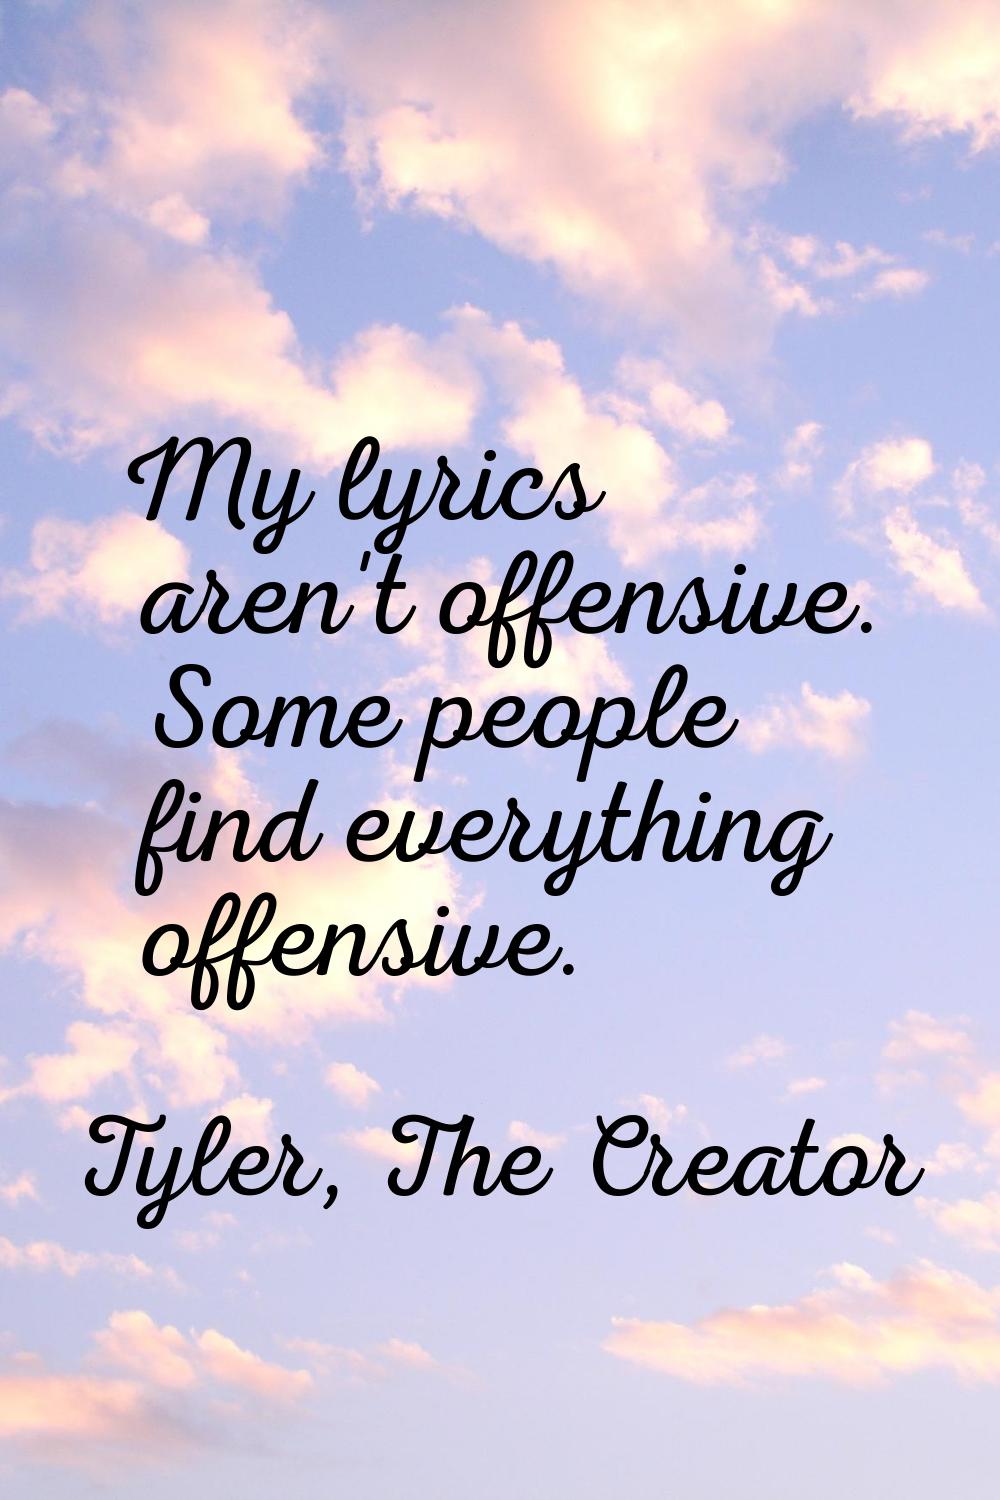 My lyrics aren't offensive. Some people find everything offensive.